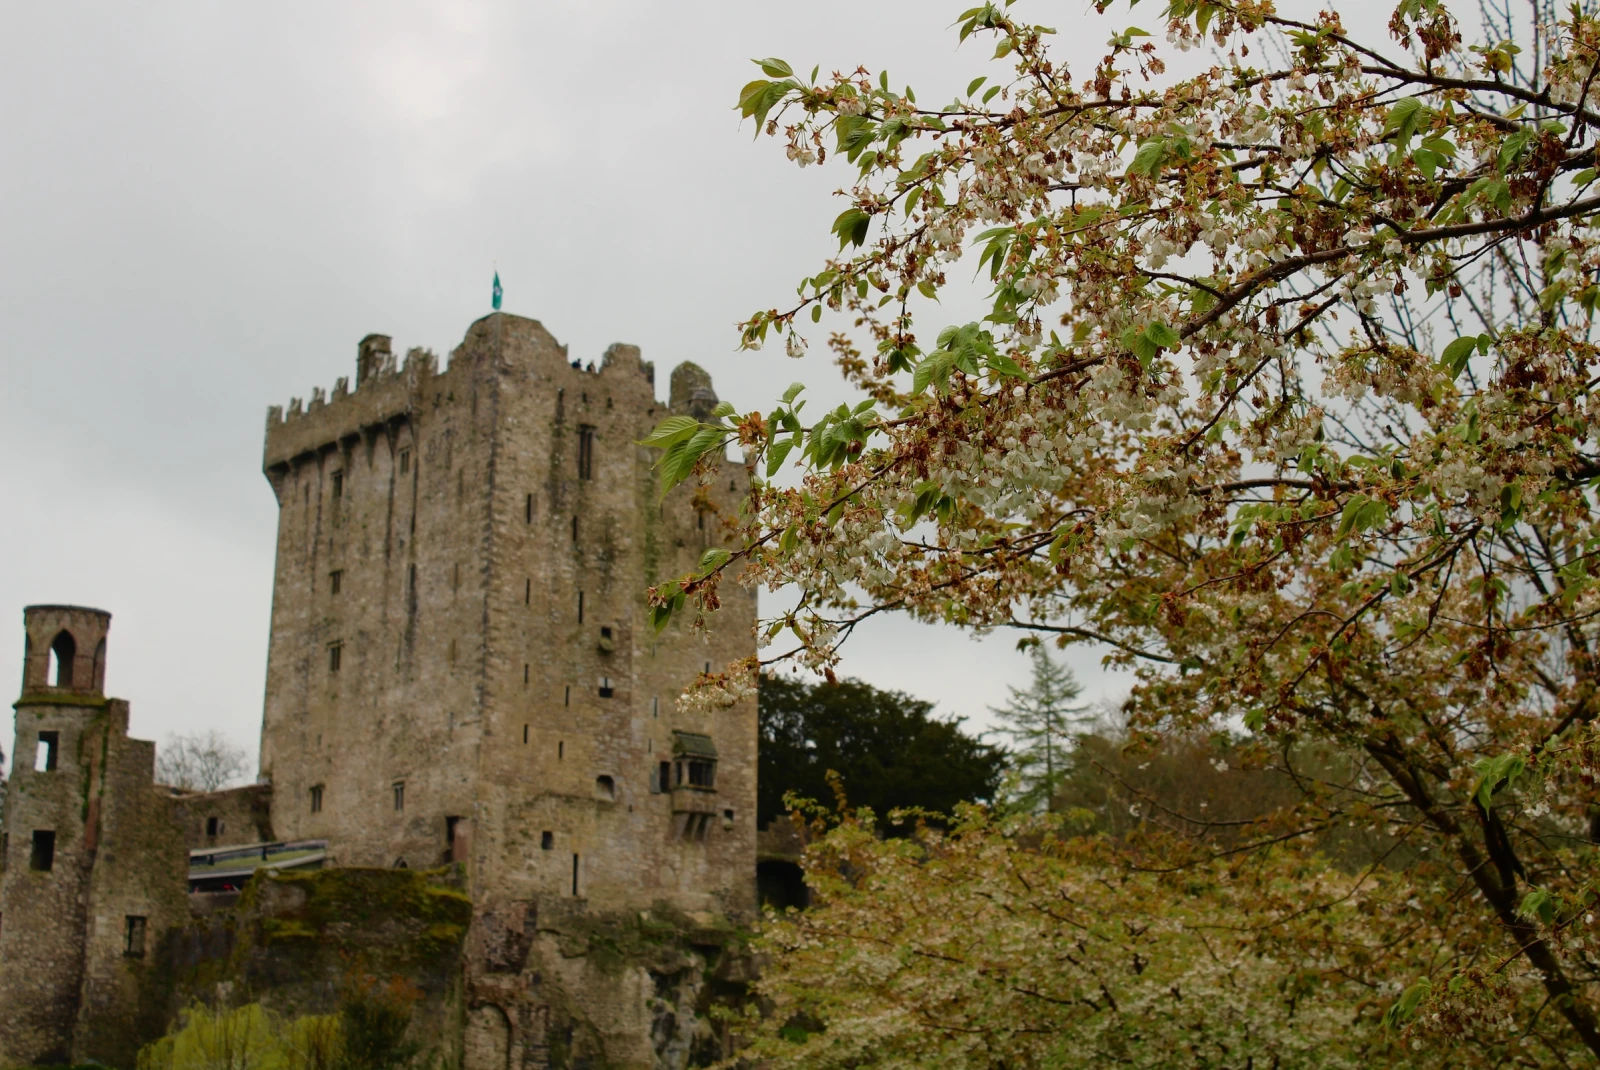 At the top of the castle lies the Blarney Stone.